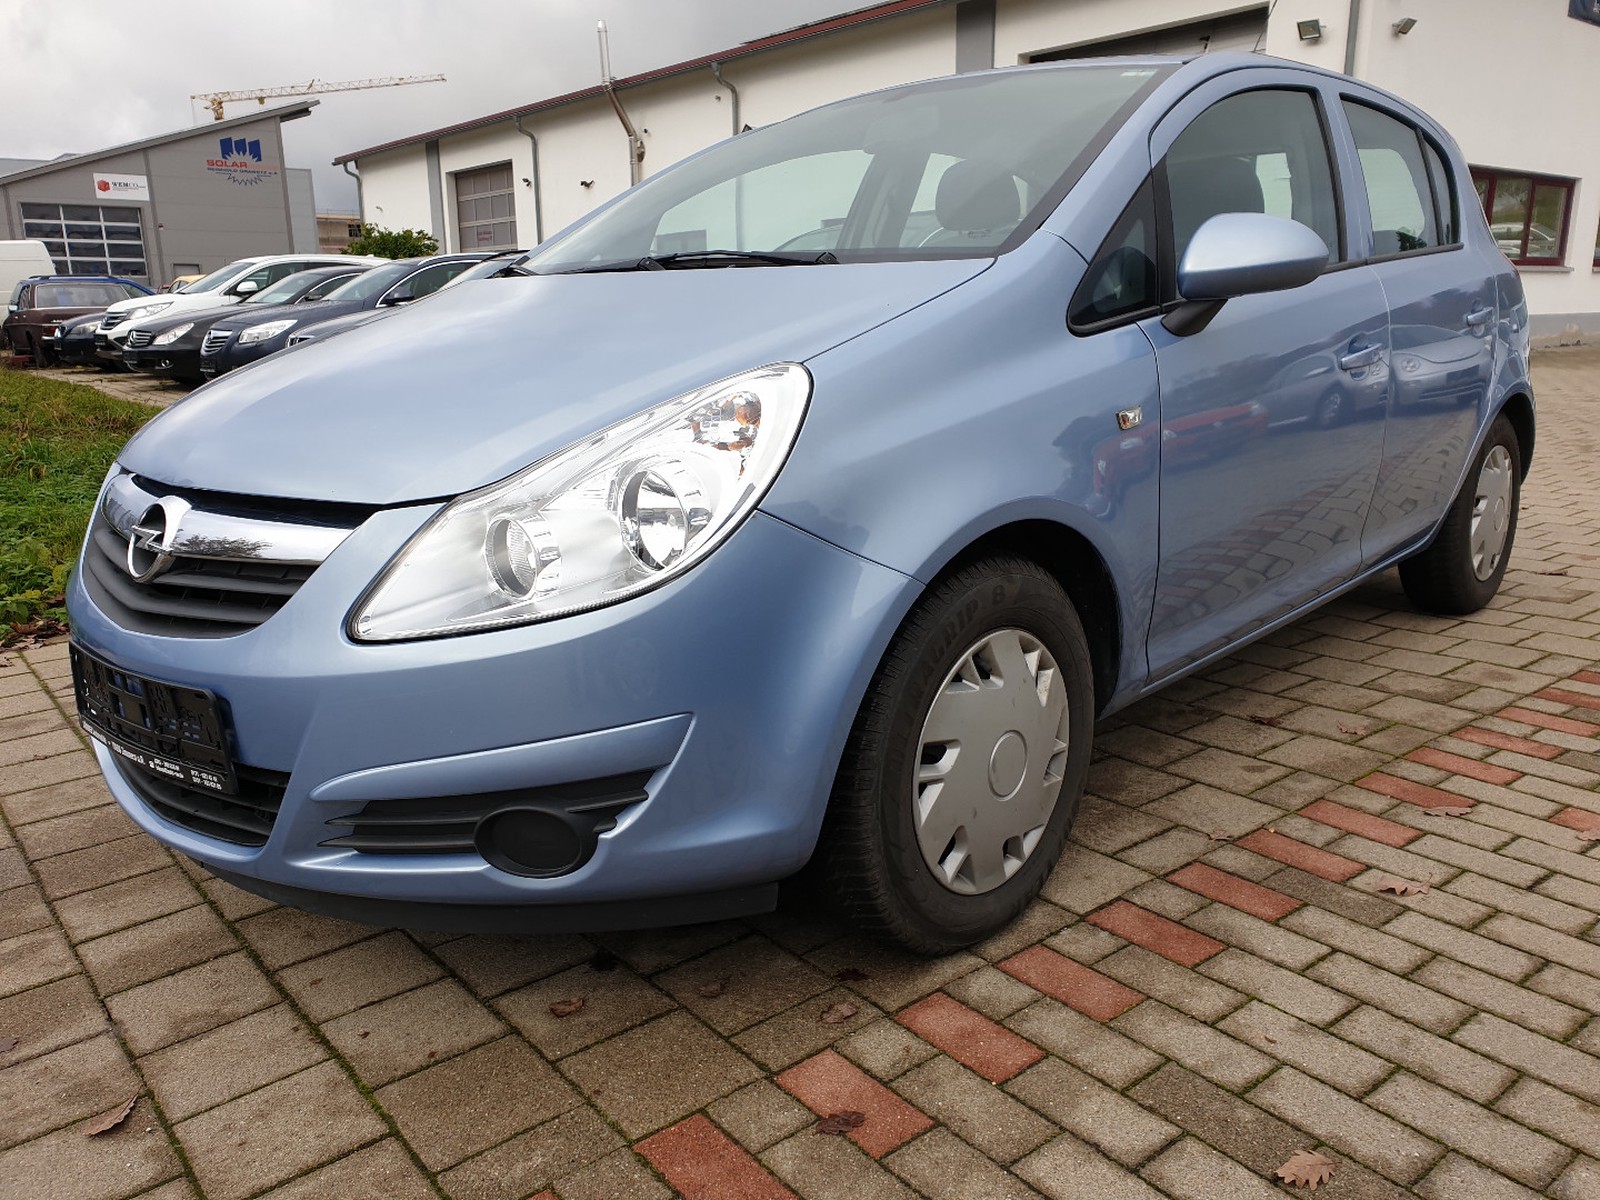 Opel Corsa D 1.2 Edition/1 Hand used buy in Zimmern ob Rottweil - Int.Nr.:  806 SOLD